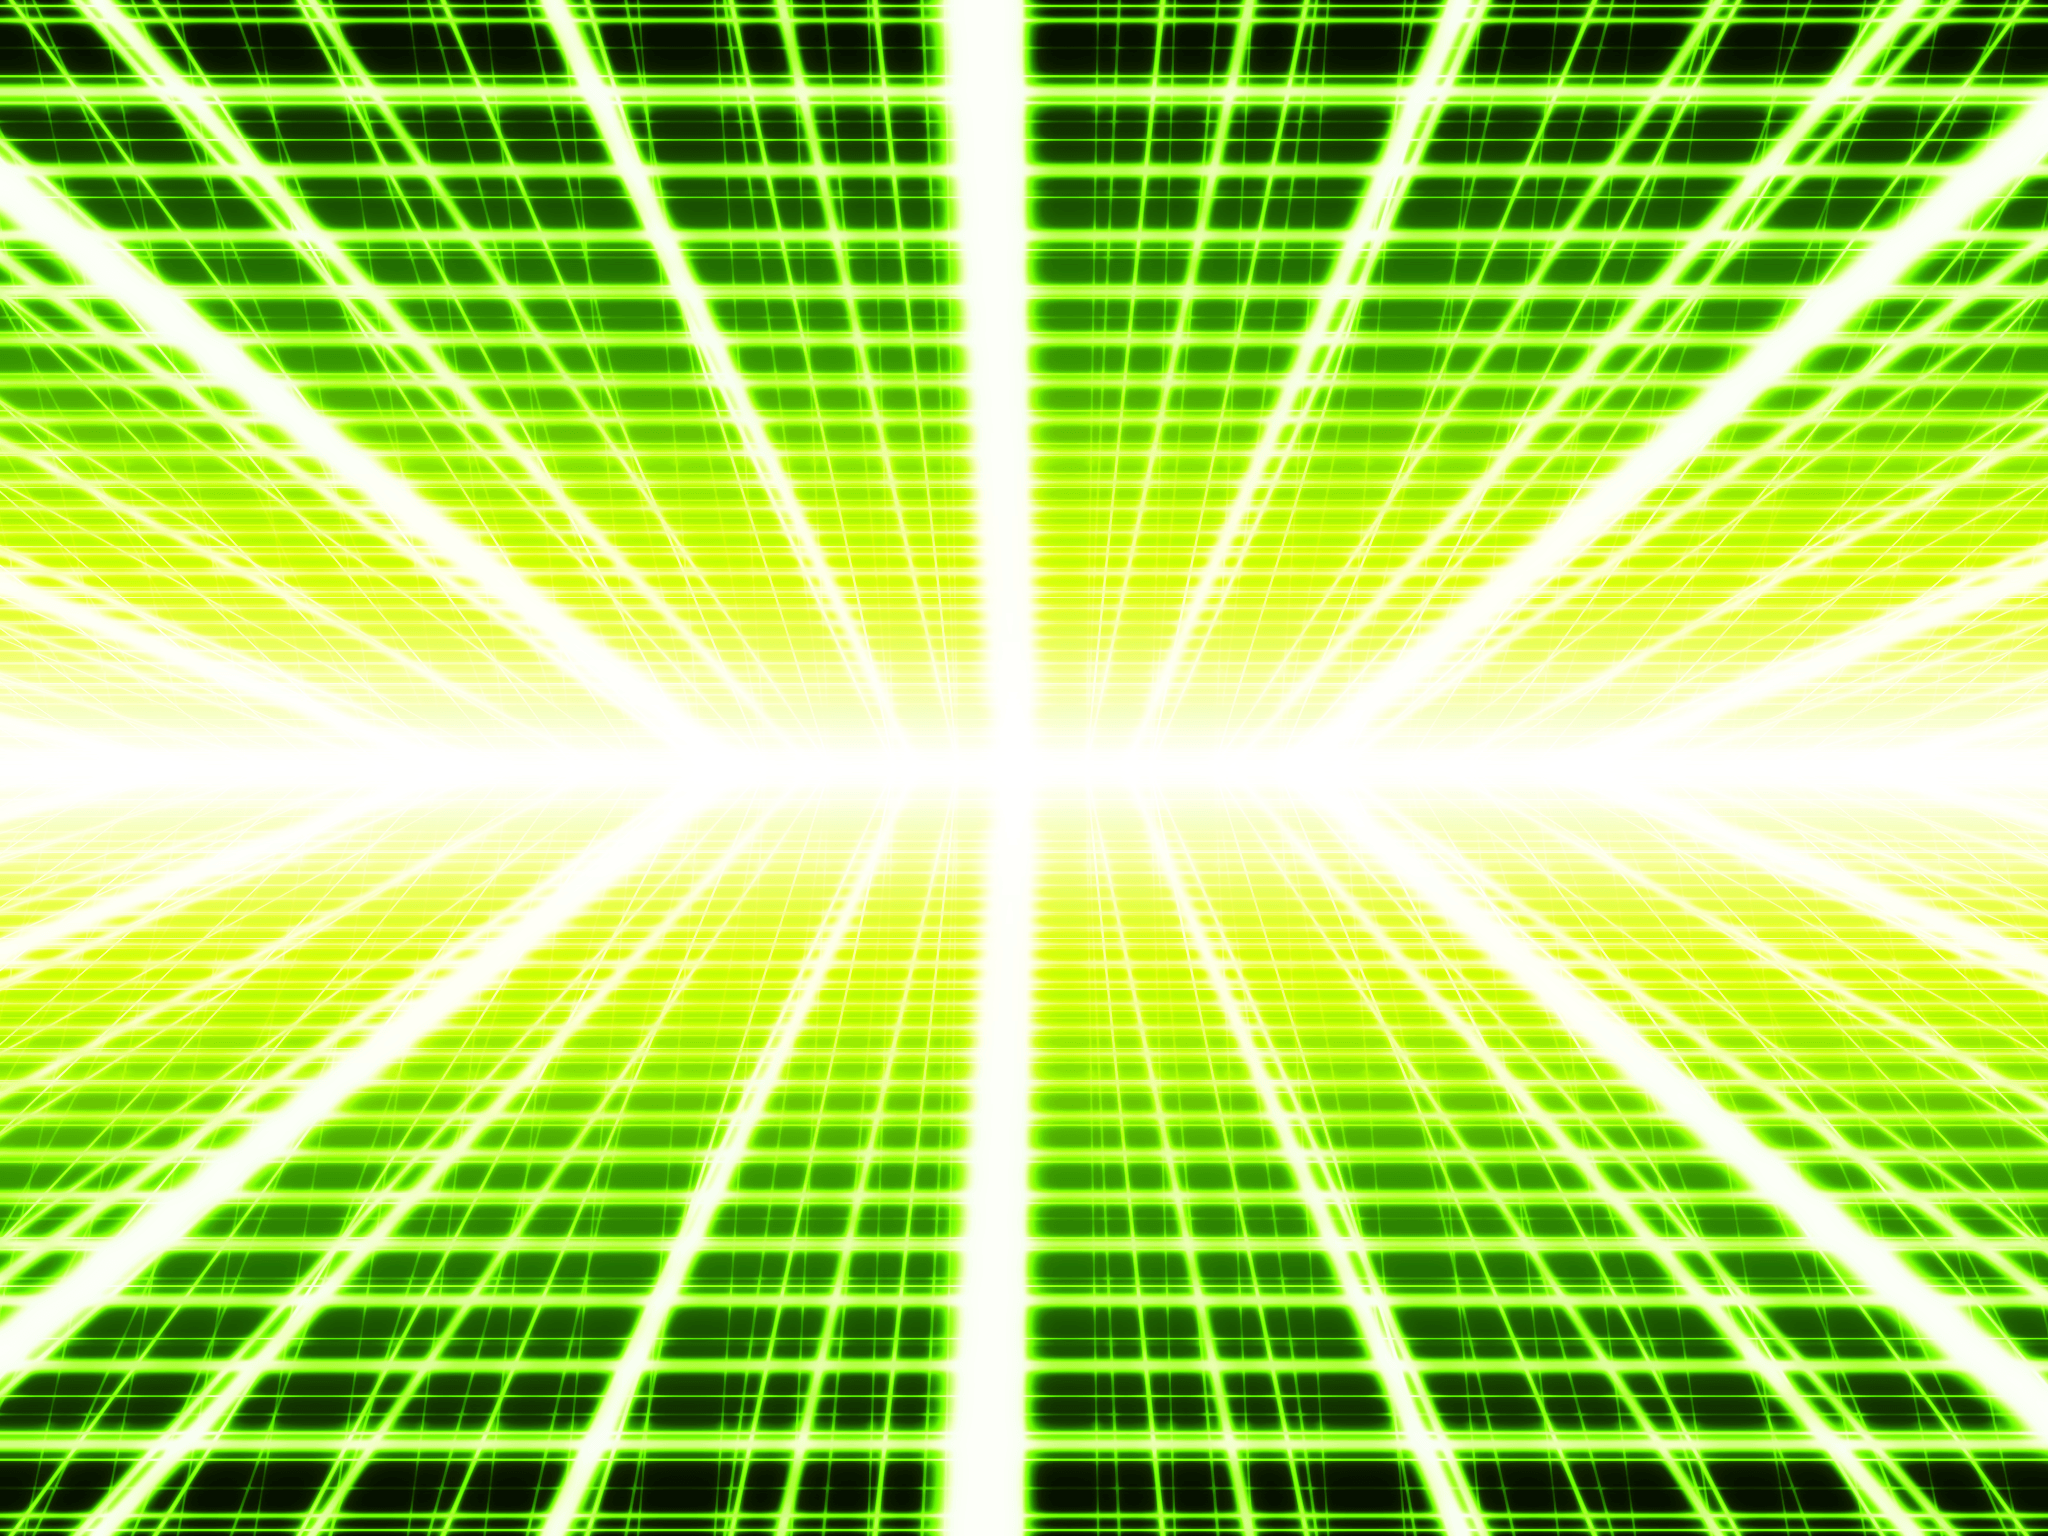 3D Cyber Grid Background By TBH 1138